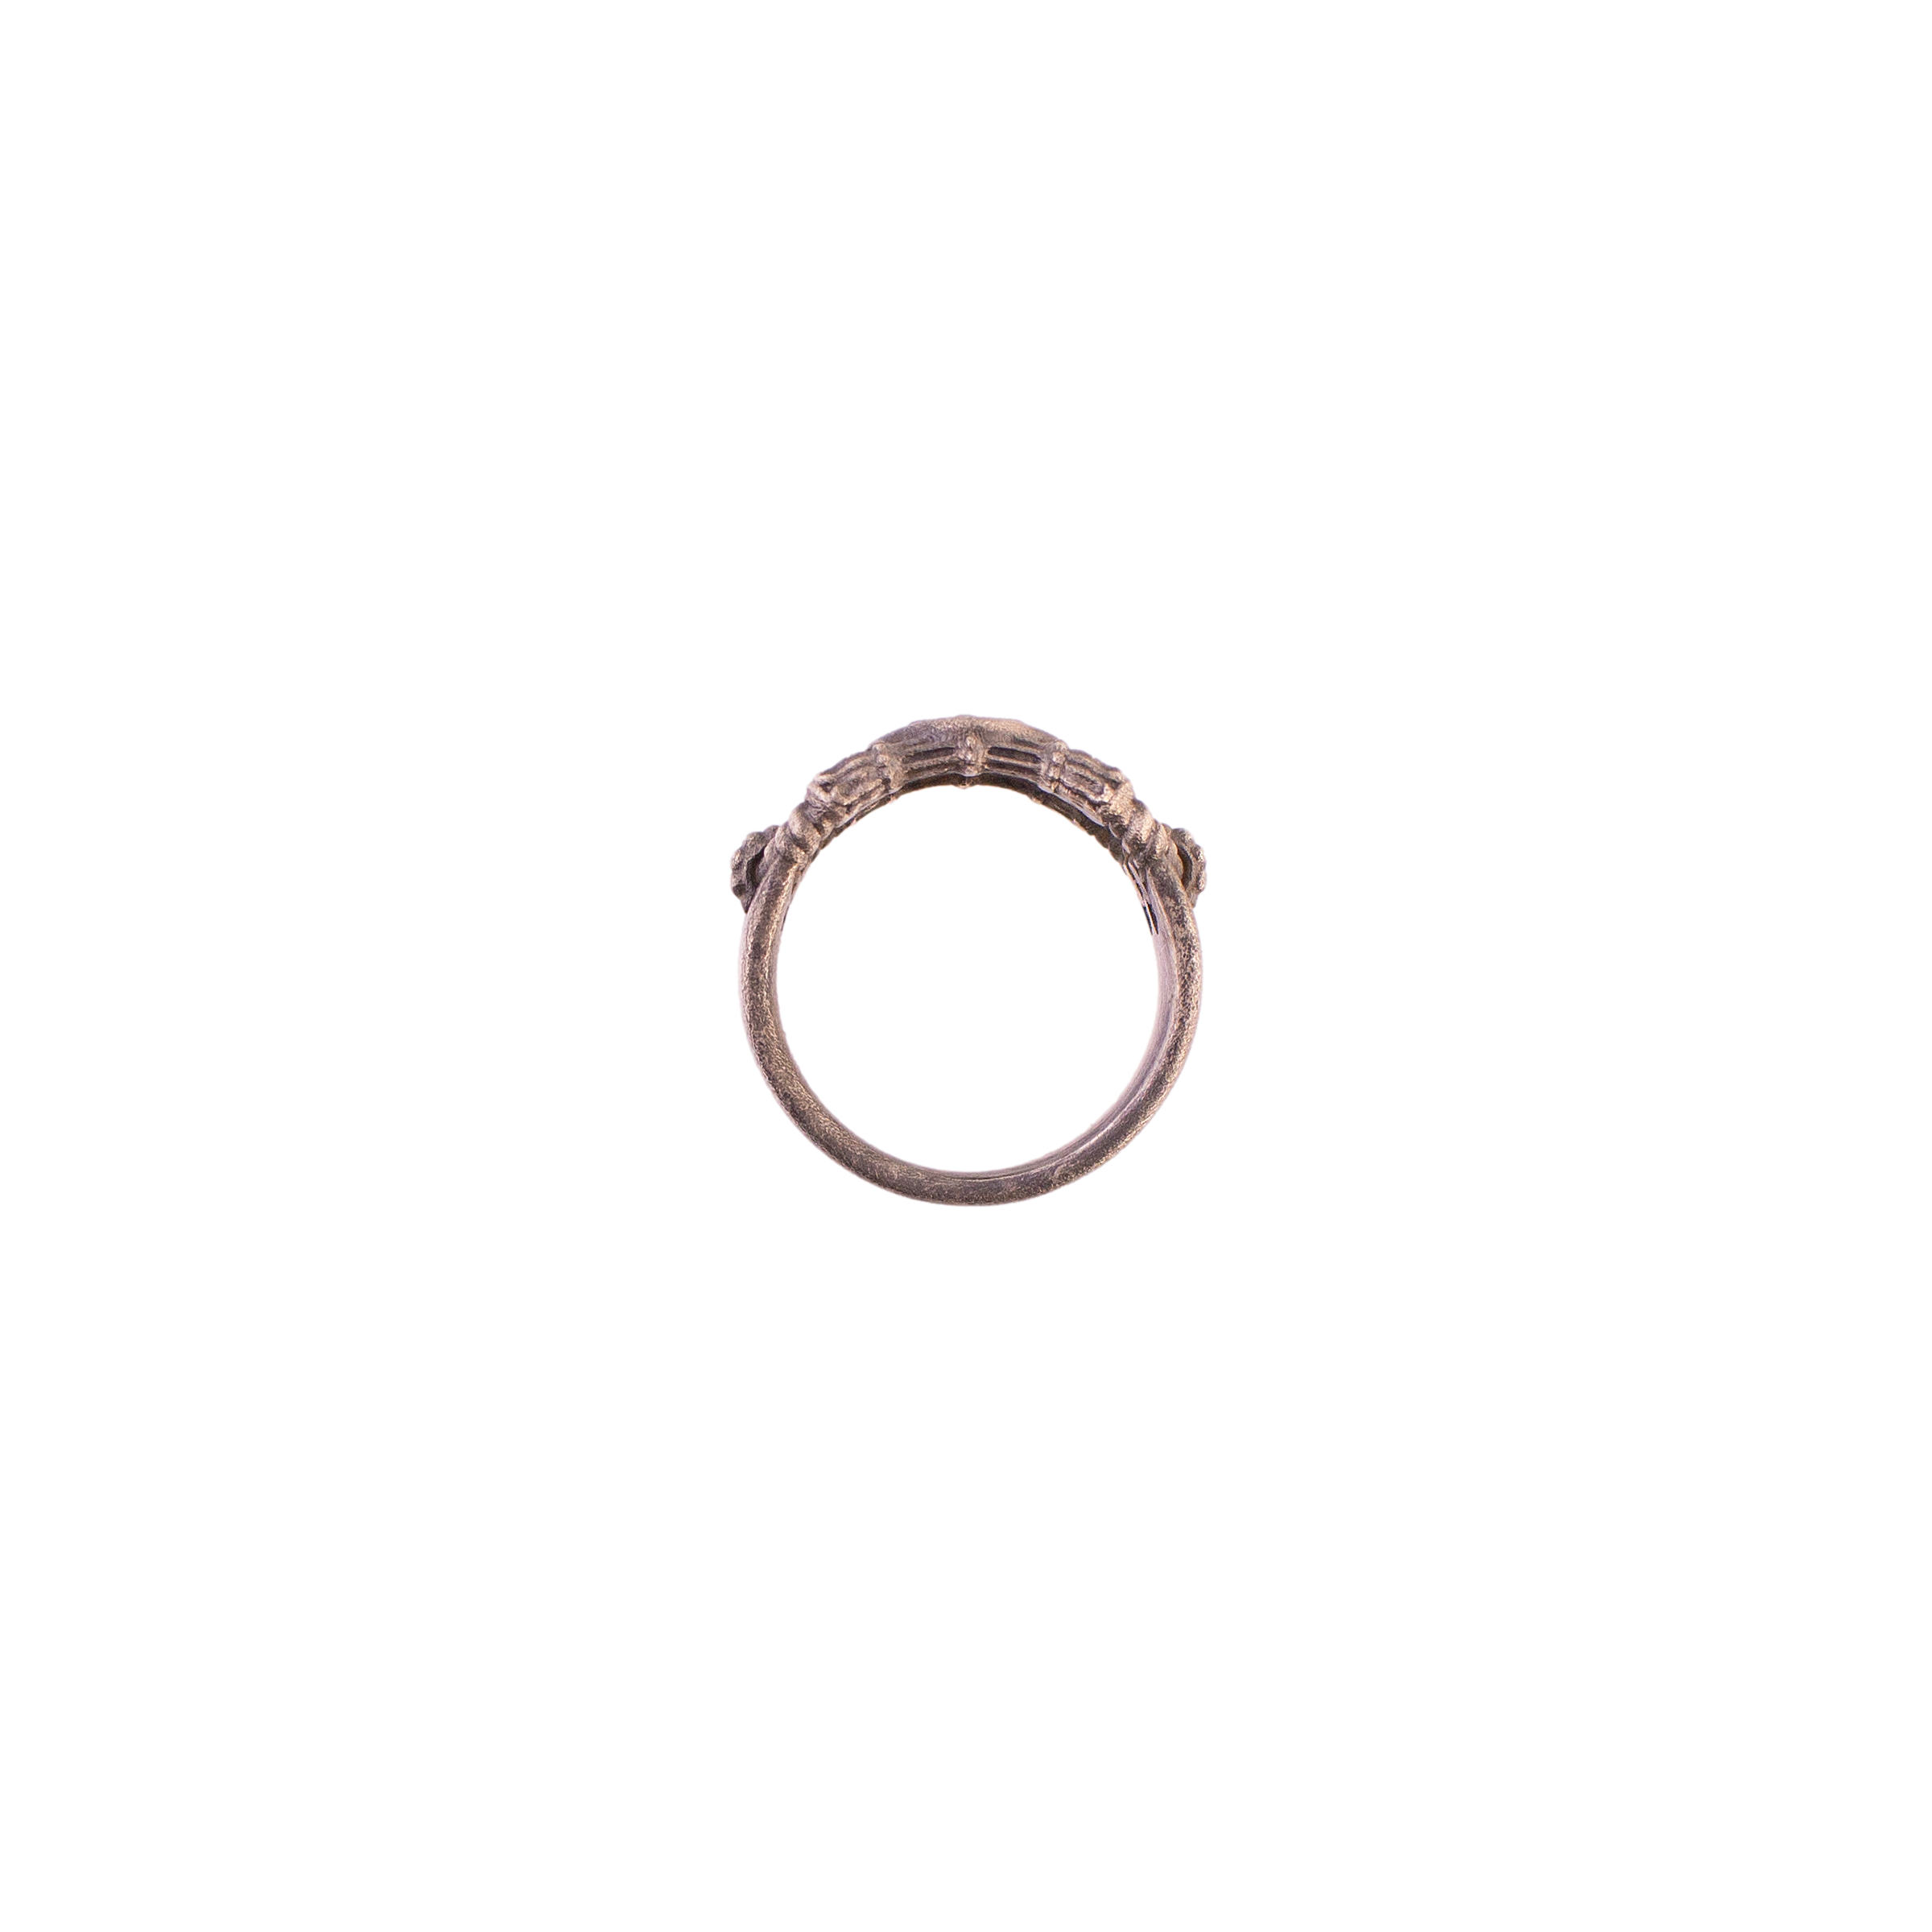 The Wrought Iron Ring